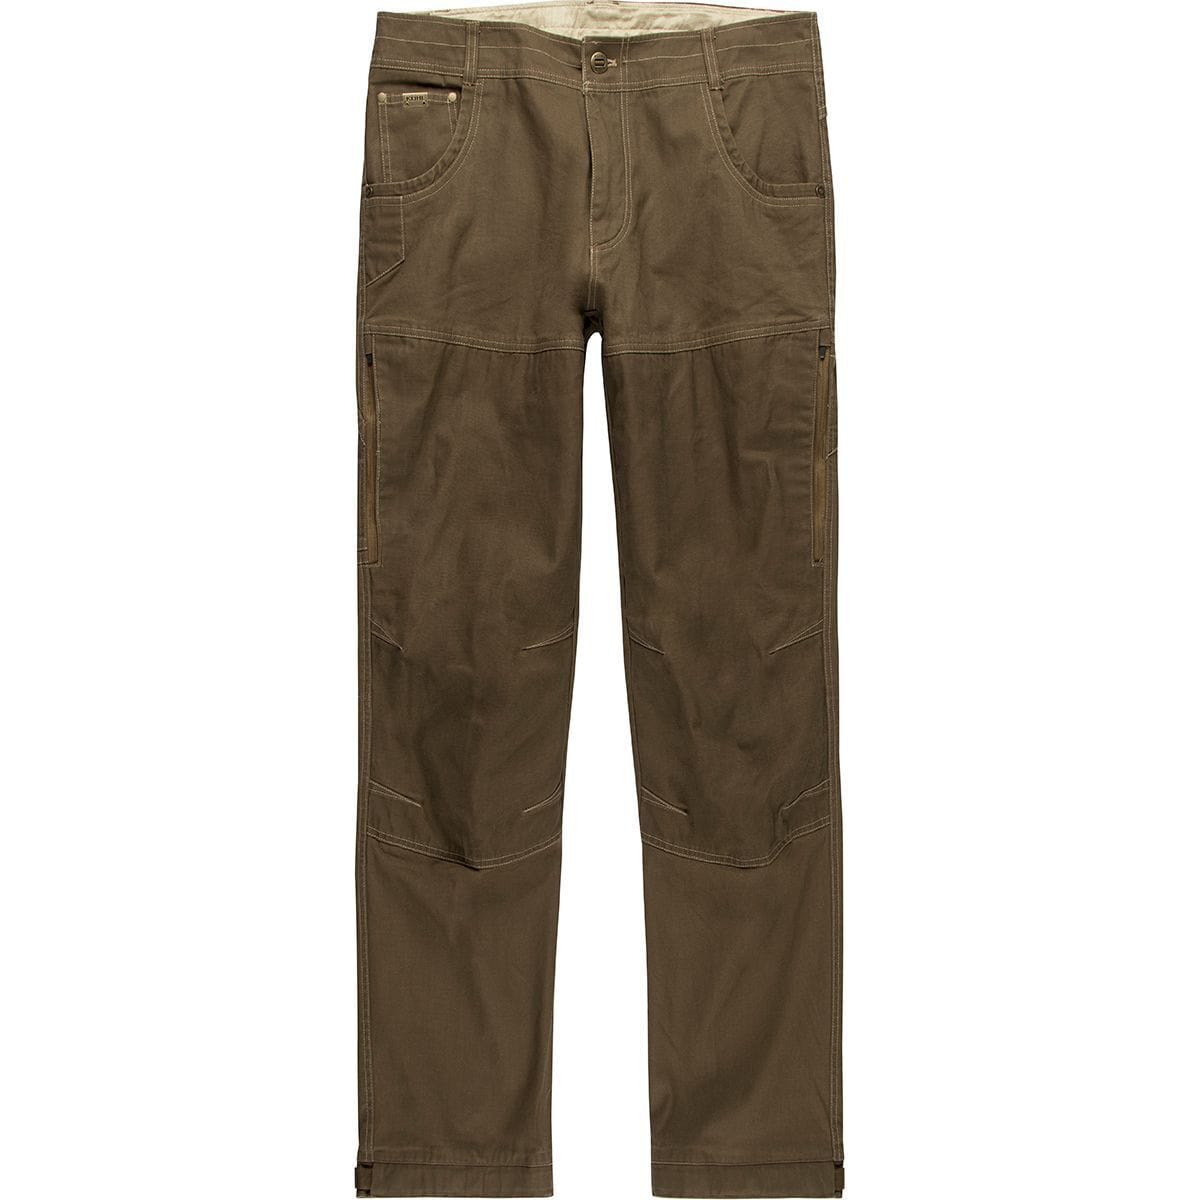 KUHL Above The Law Pant - Men's - Clothing